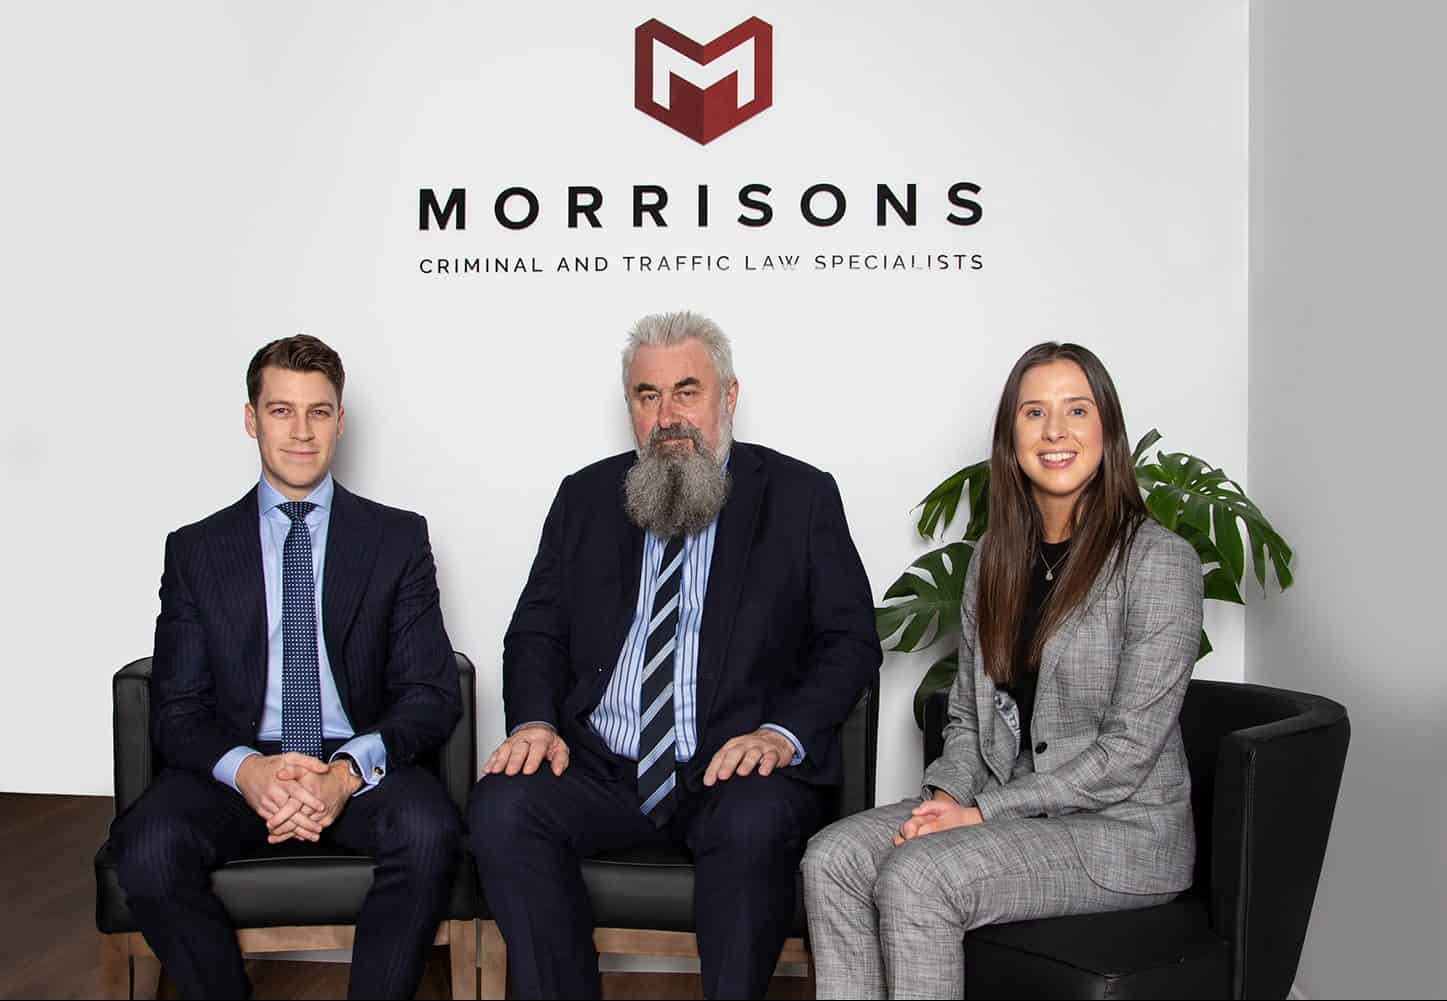 Morrisons - Criminal and Traffic Law Specialists